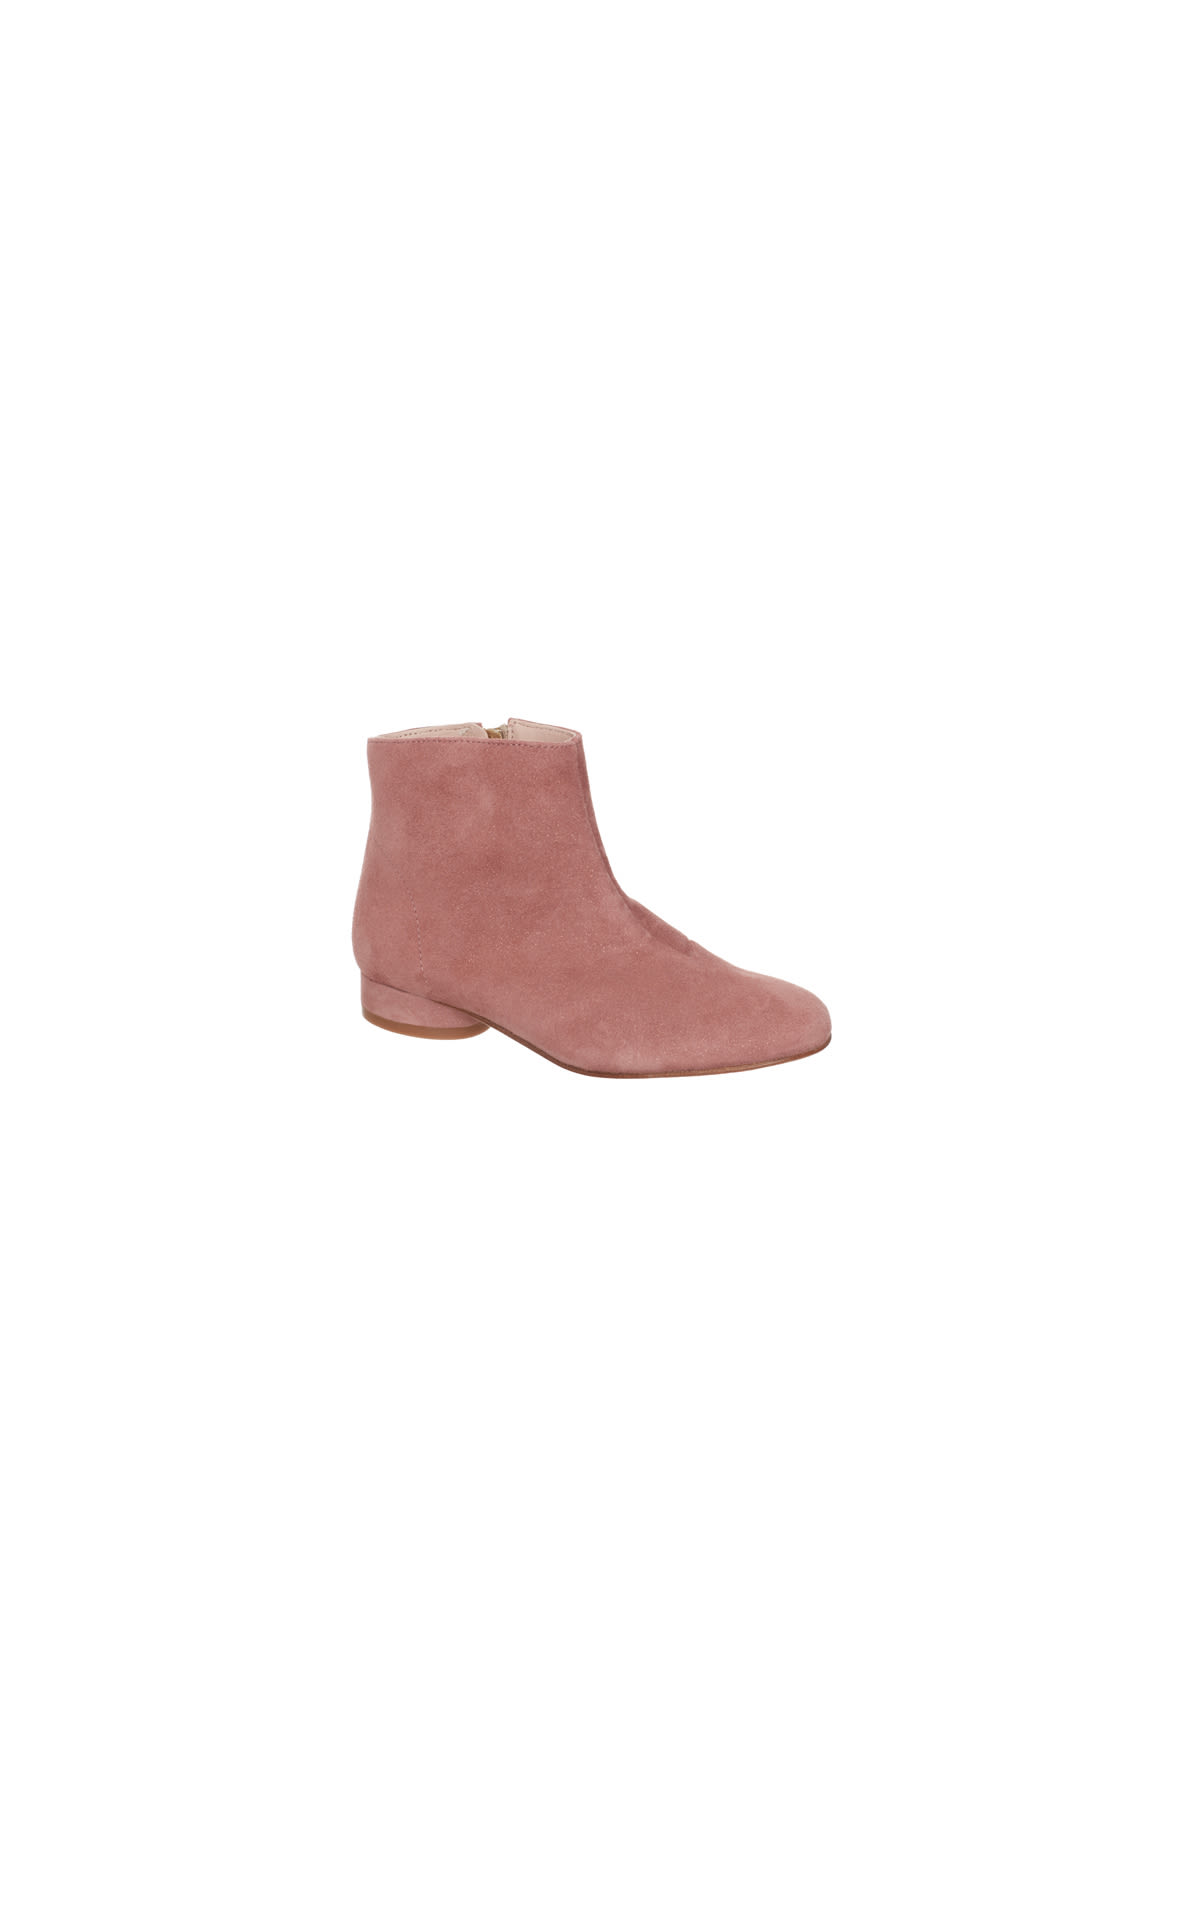 Bonpoint Pink boots from Bicester Village